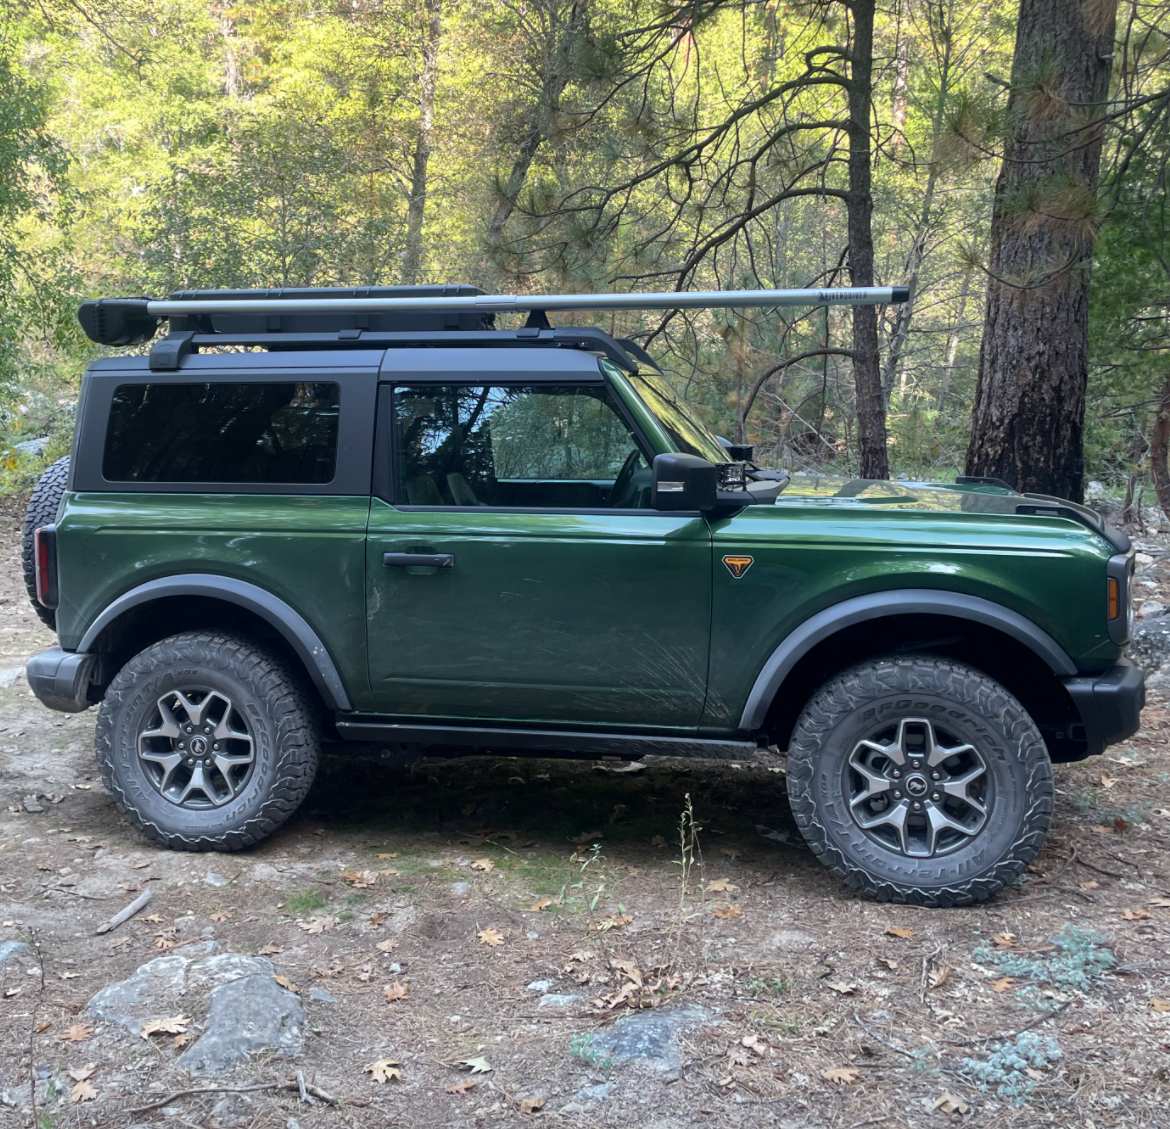 Ford Bronco 2 Door Broncos - What’s on your roof racks? [Photos Thread] IMG_5040